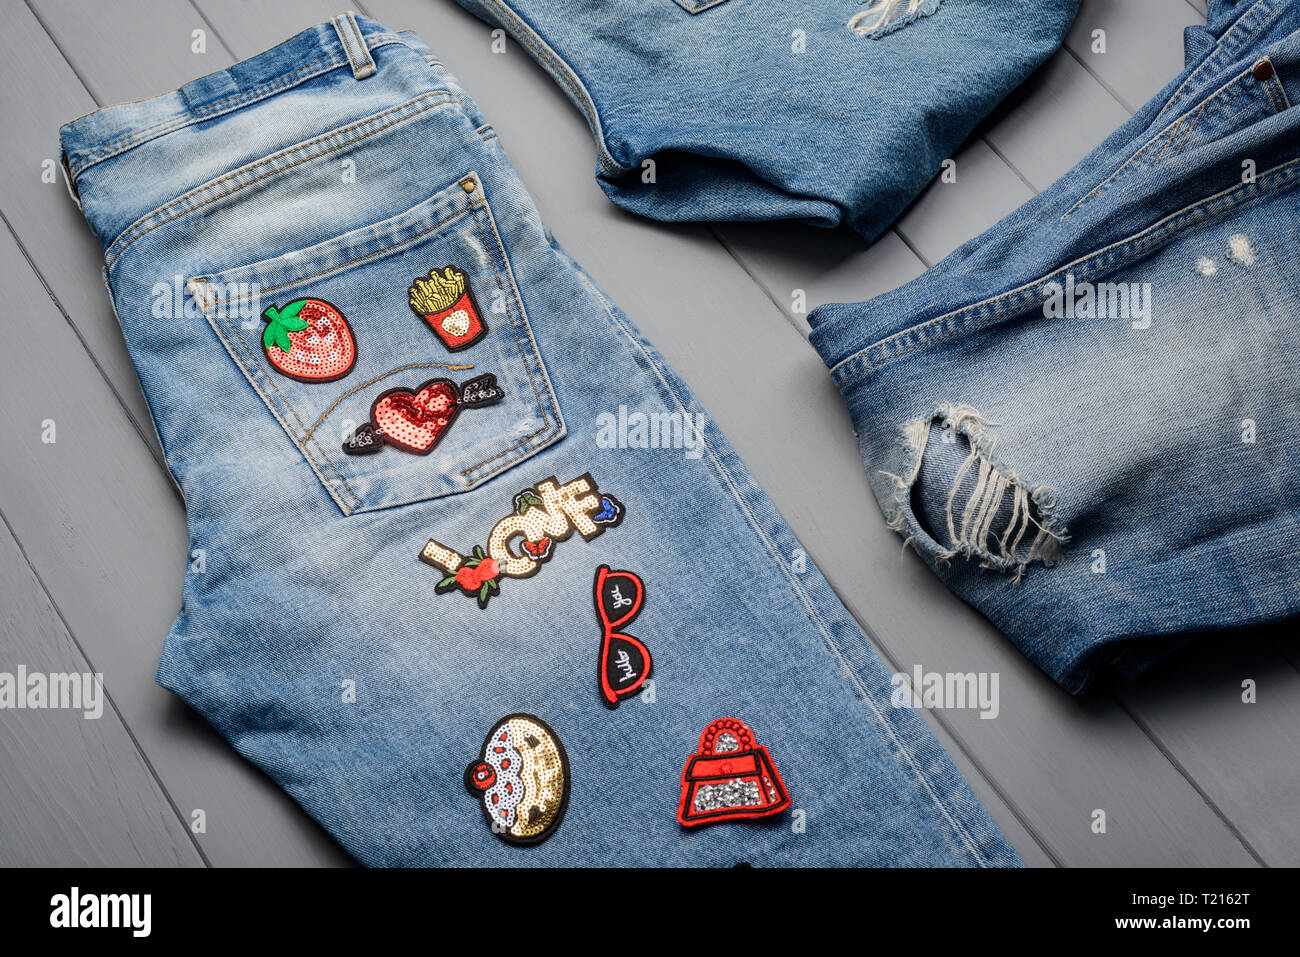 Jeans with various patches Stock Photo